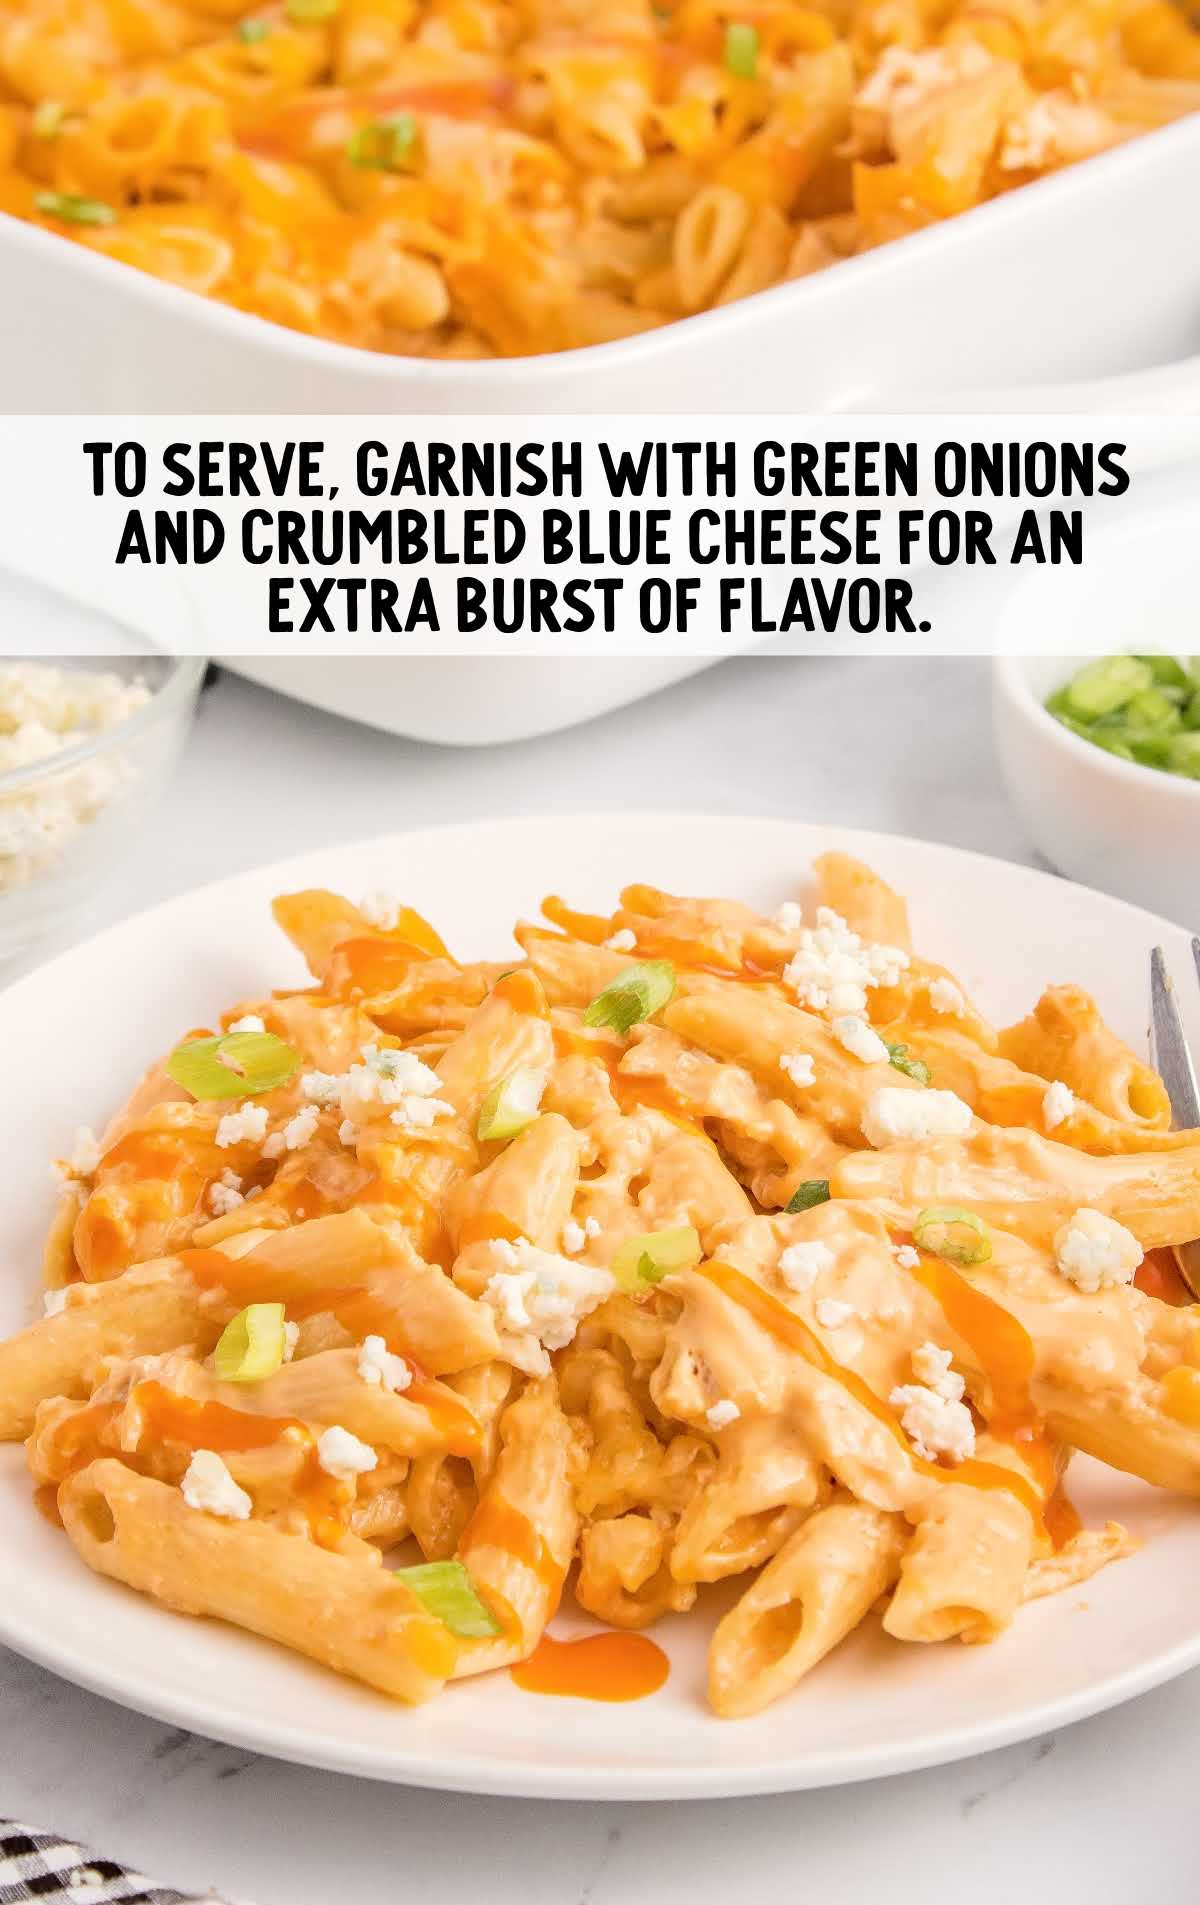 a plate of pasta garnished with green onions and blue cheese